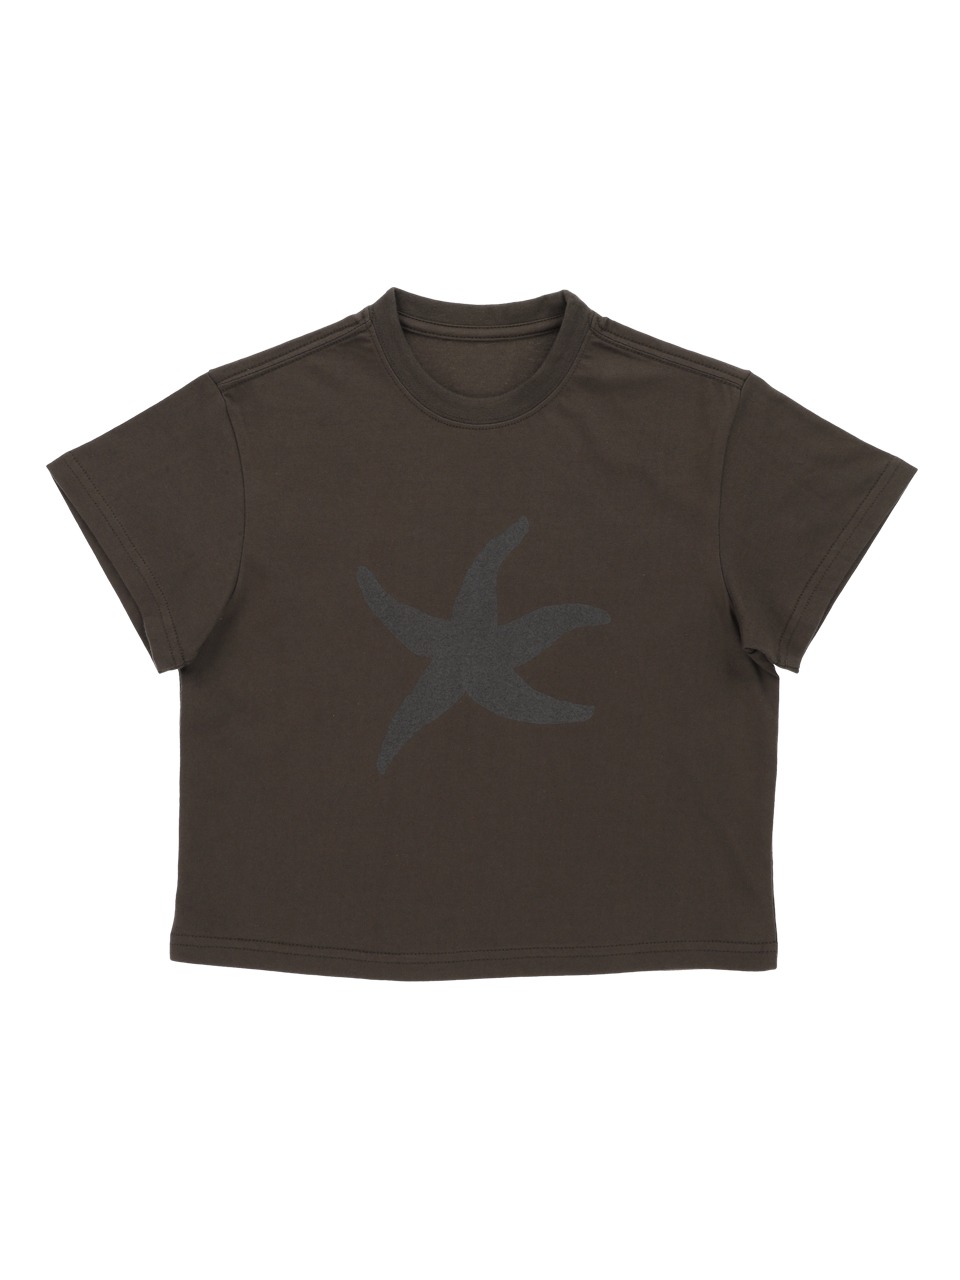 THECOLDESTMOMENT - TCM STARFISH LOGO CROP T (BROWN)